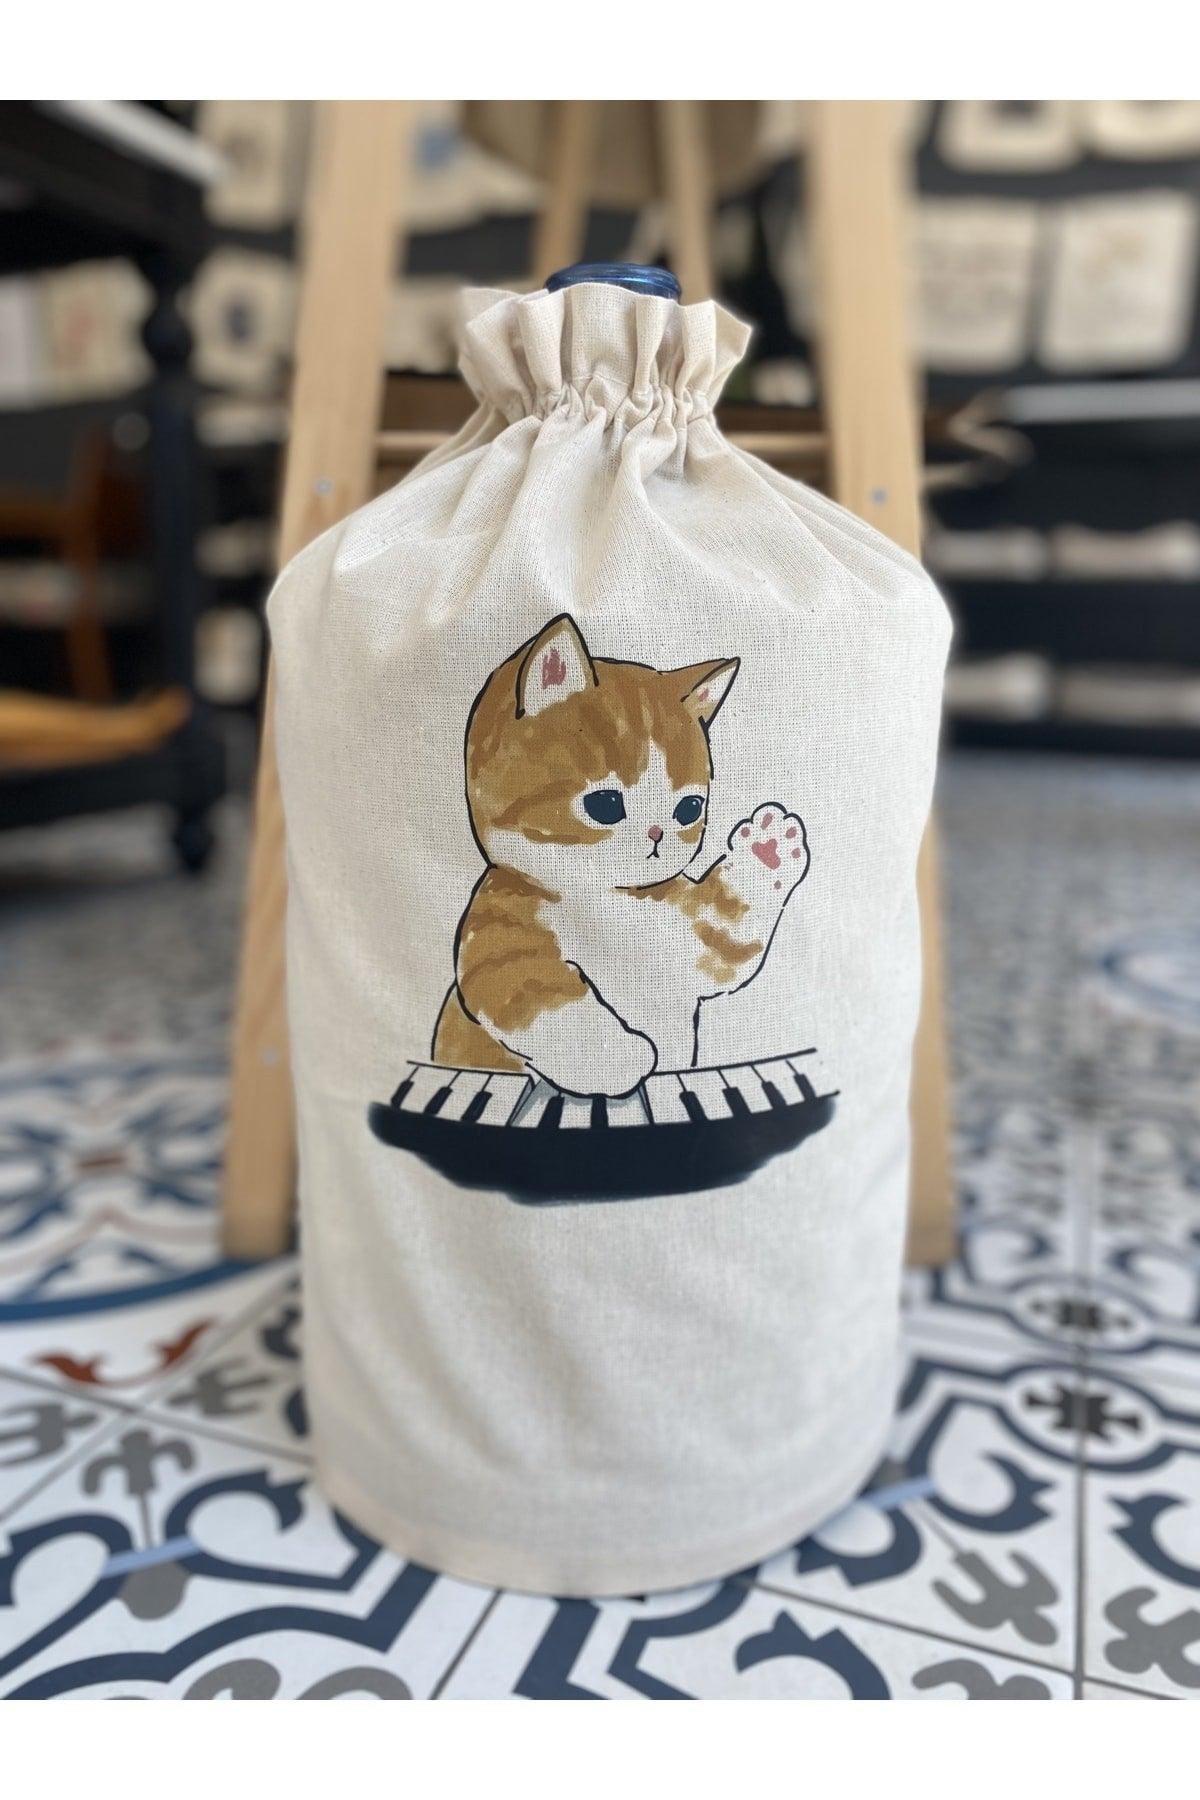 Cream Carboy Cover Piano Playing Cat Printed - Swordslife